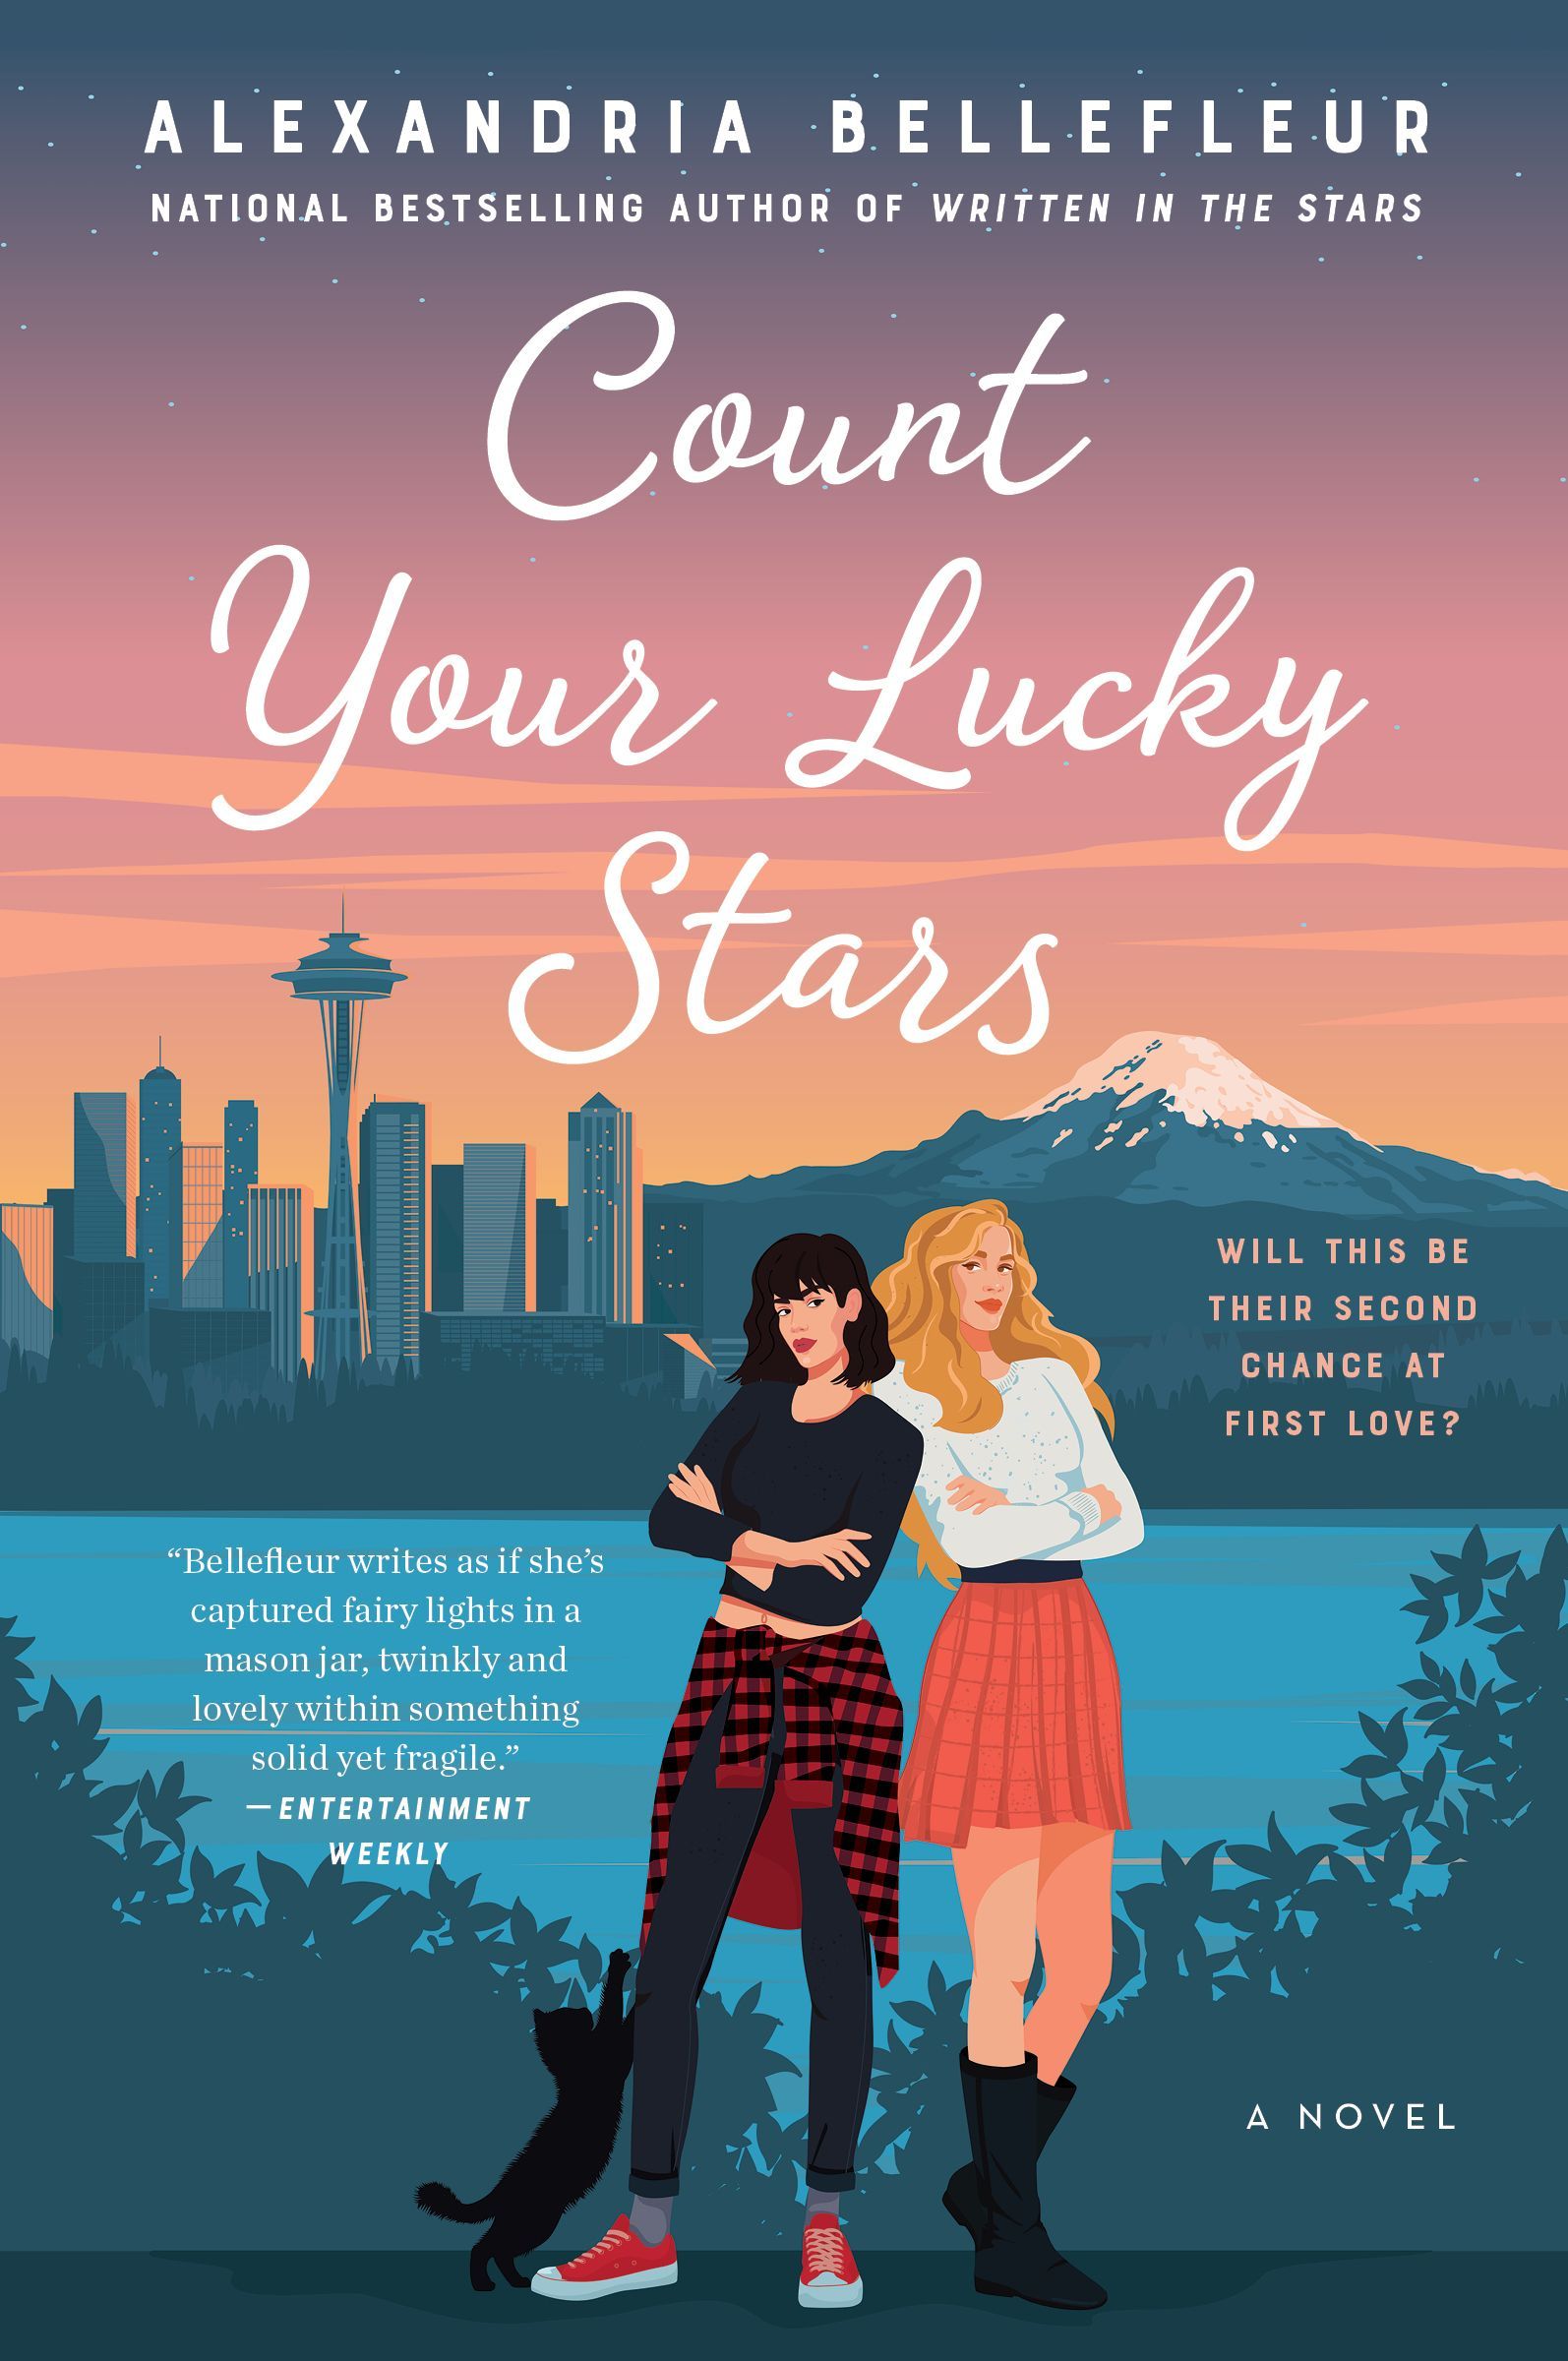 "Count Your Lucky Stars by Alexander Bellefluer, national bestselling author of Written in the Stars; Will this be their second chance at first love?; 'Bellefleur writes as if she's captured fairy lights in a mason jar, twinkly and lovely within something solid yet fragile.' –Entertainment Weekly; — Image shows two women and a black cat in front of the Seattle skyline"